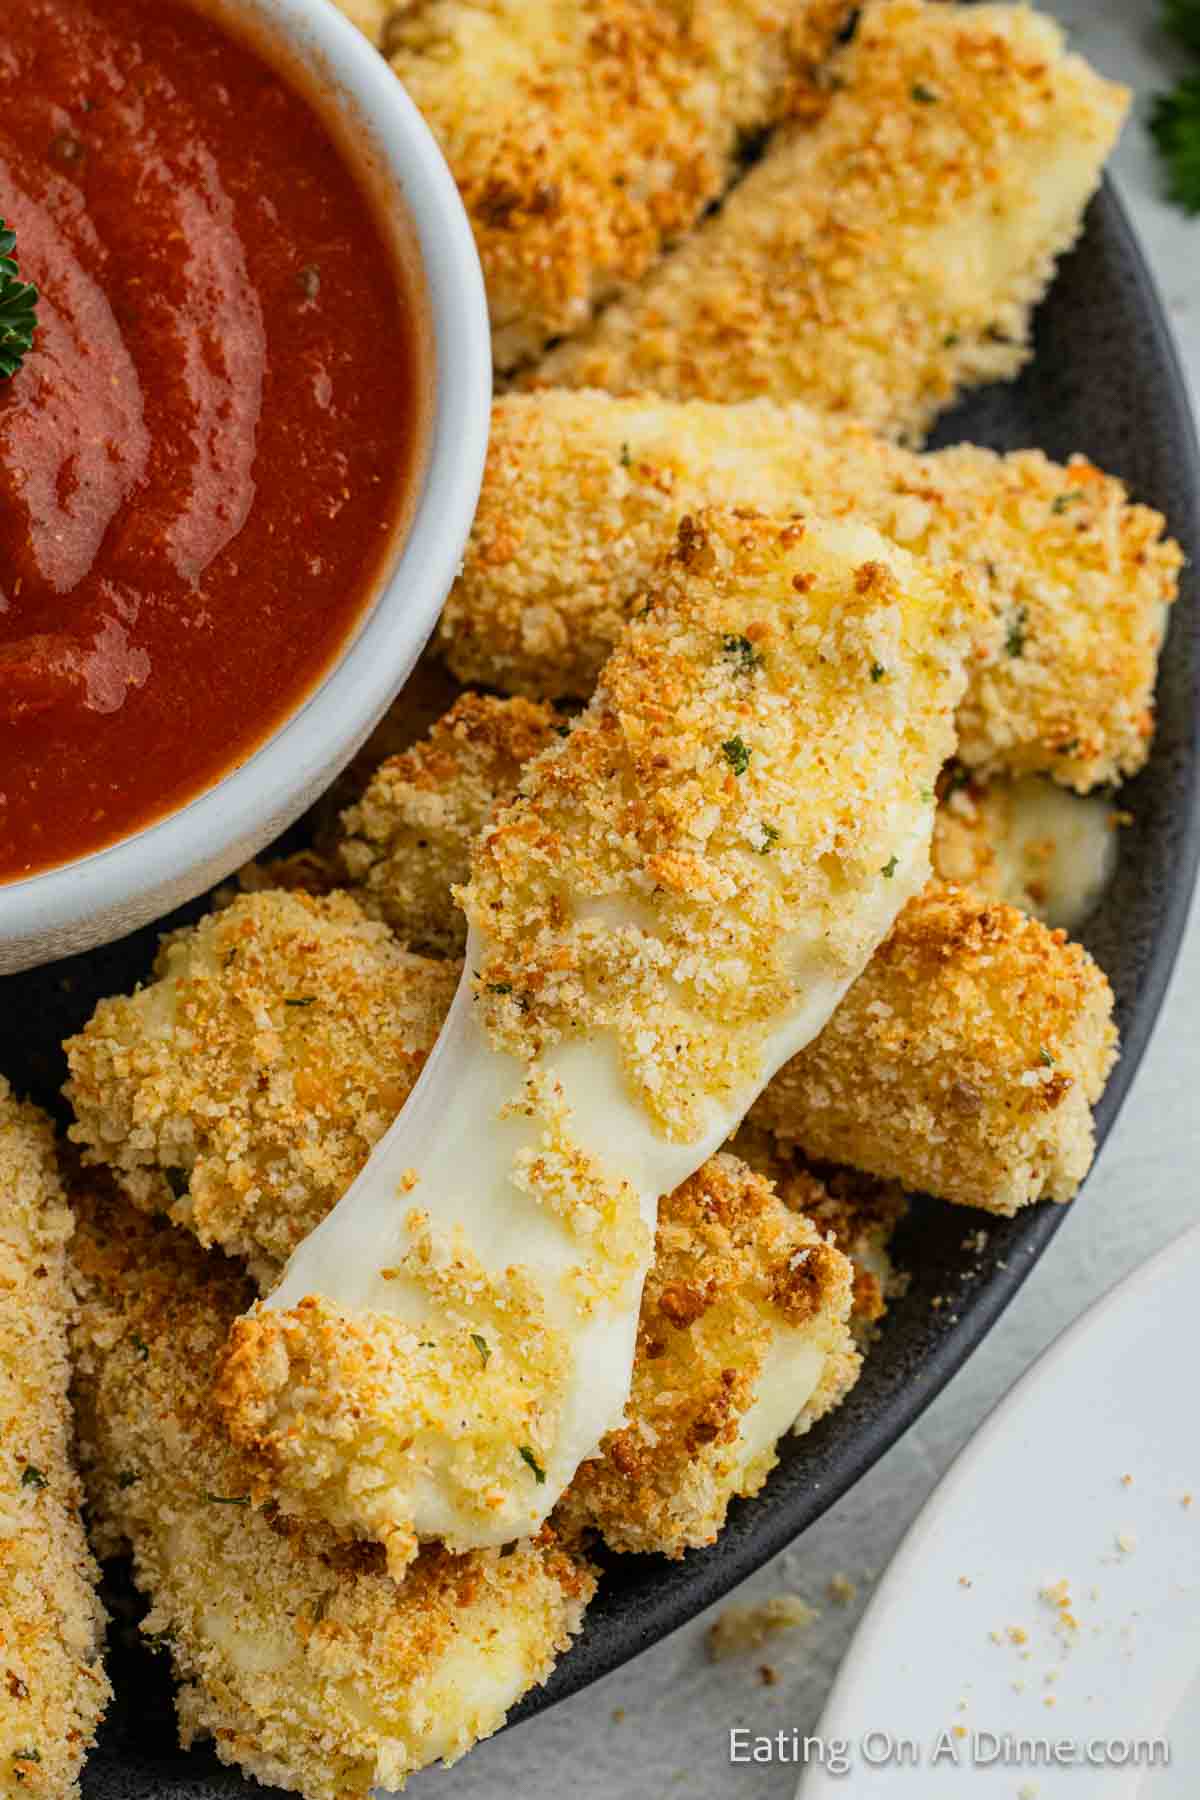 Close up image mozzarella sticks on a platter with a side of pizza sauce